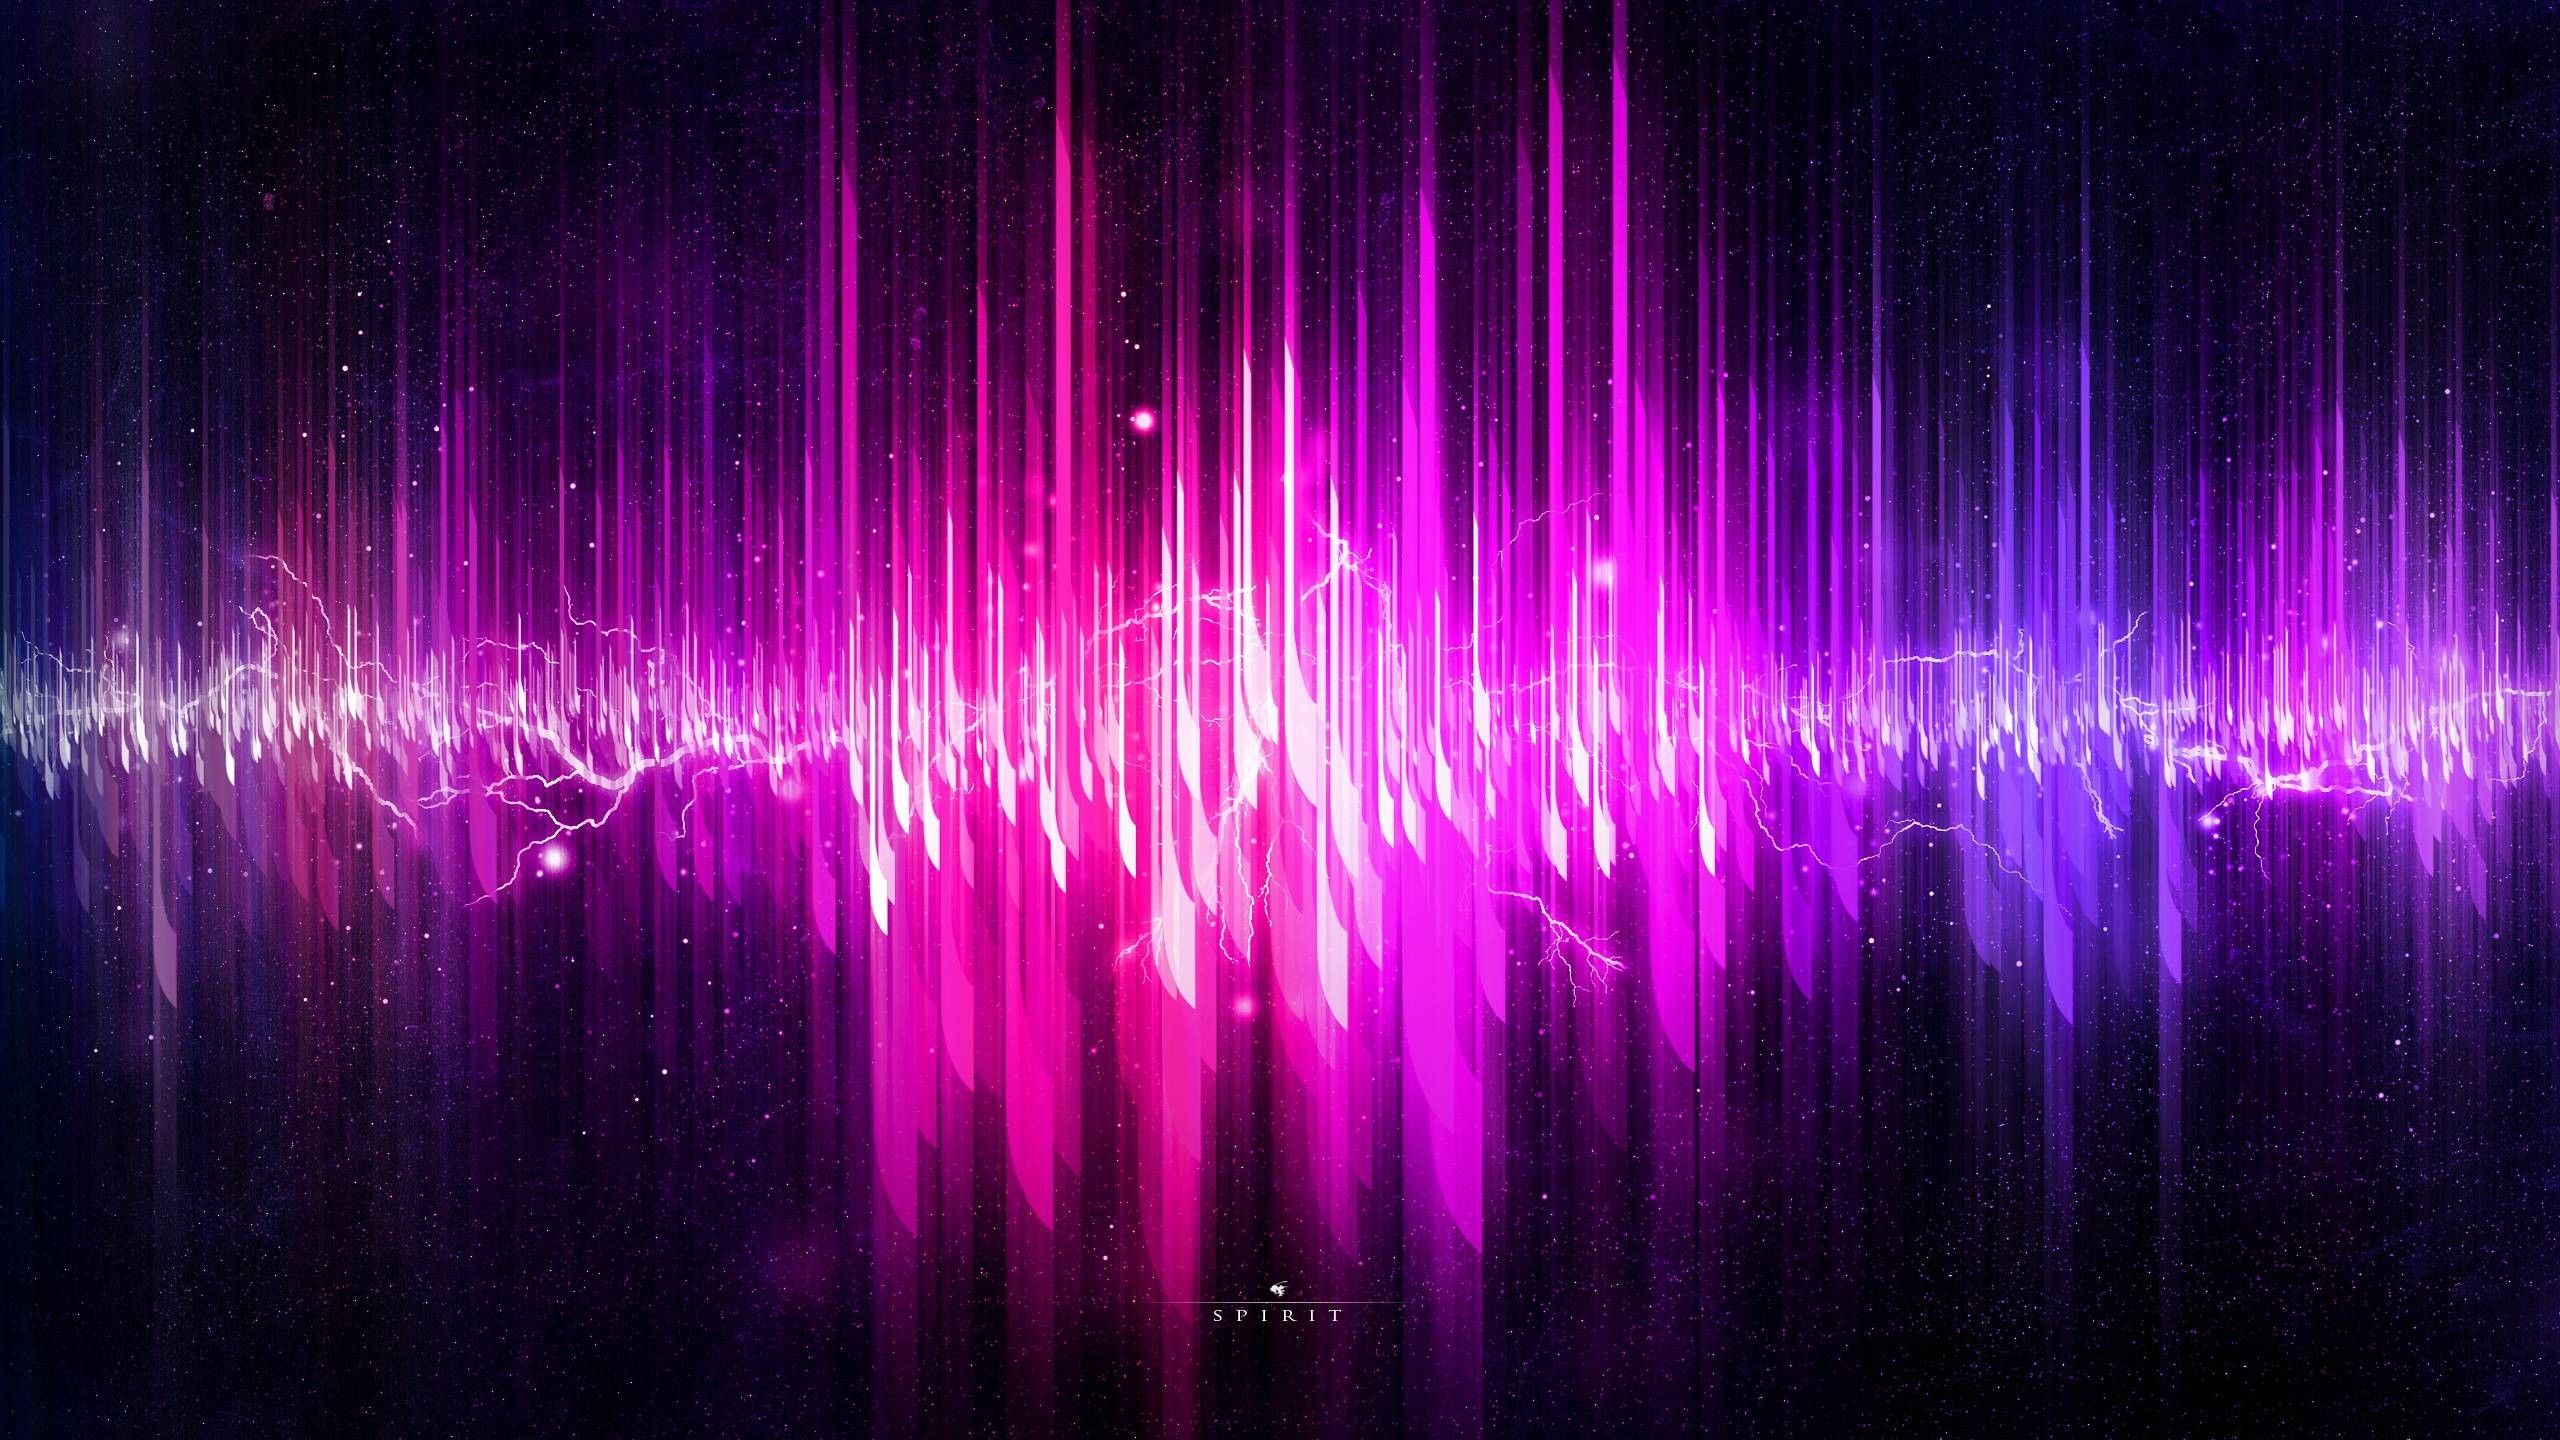 Abstract purple and pink sound wave wallpaper - Neon purple, 2560x1440